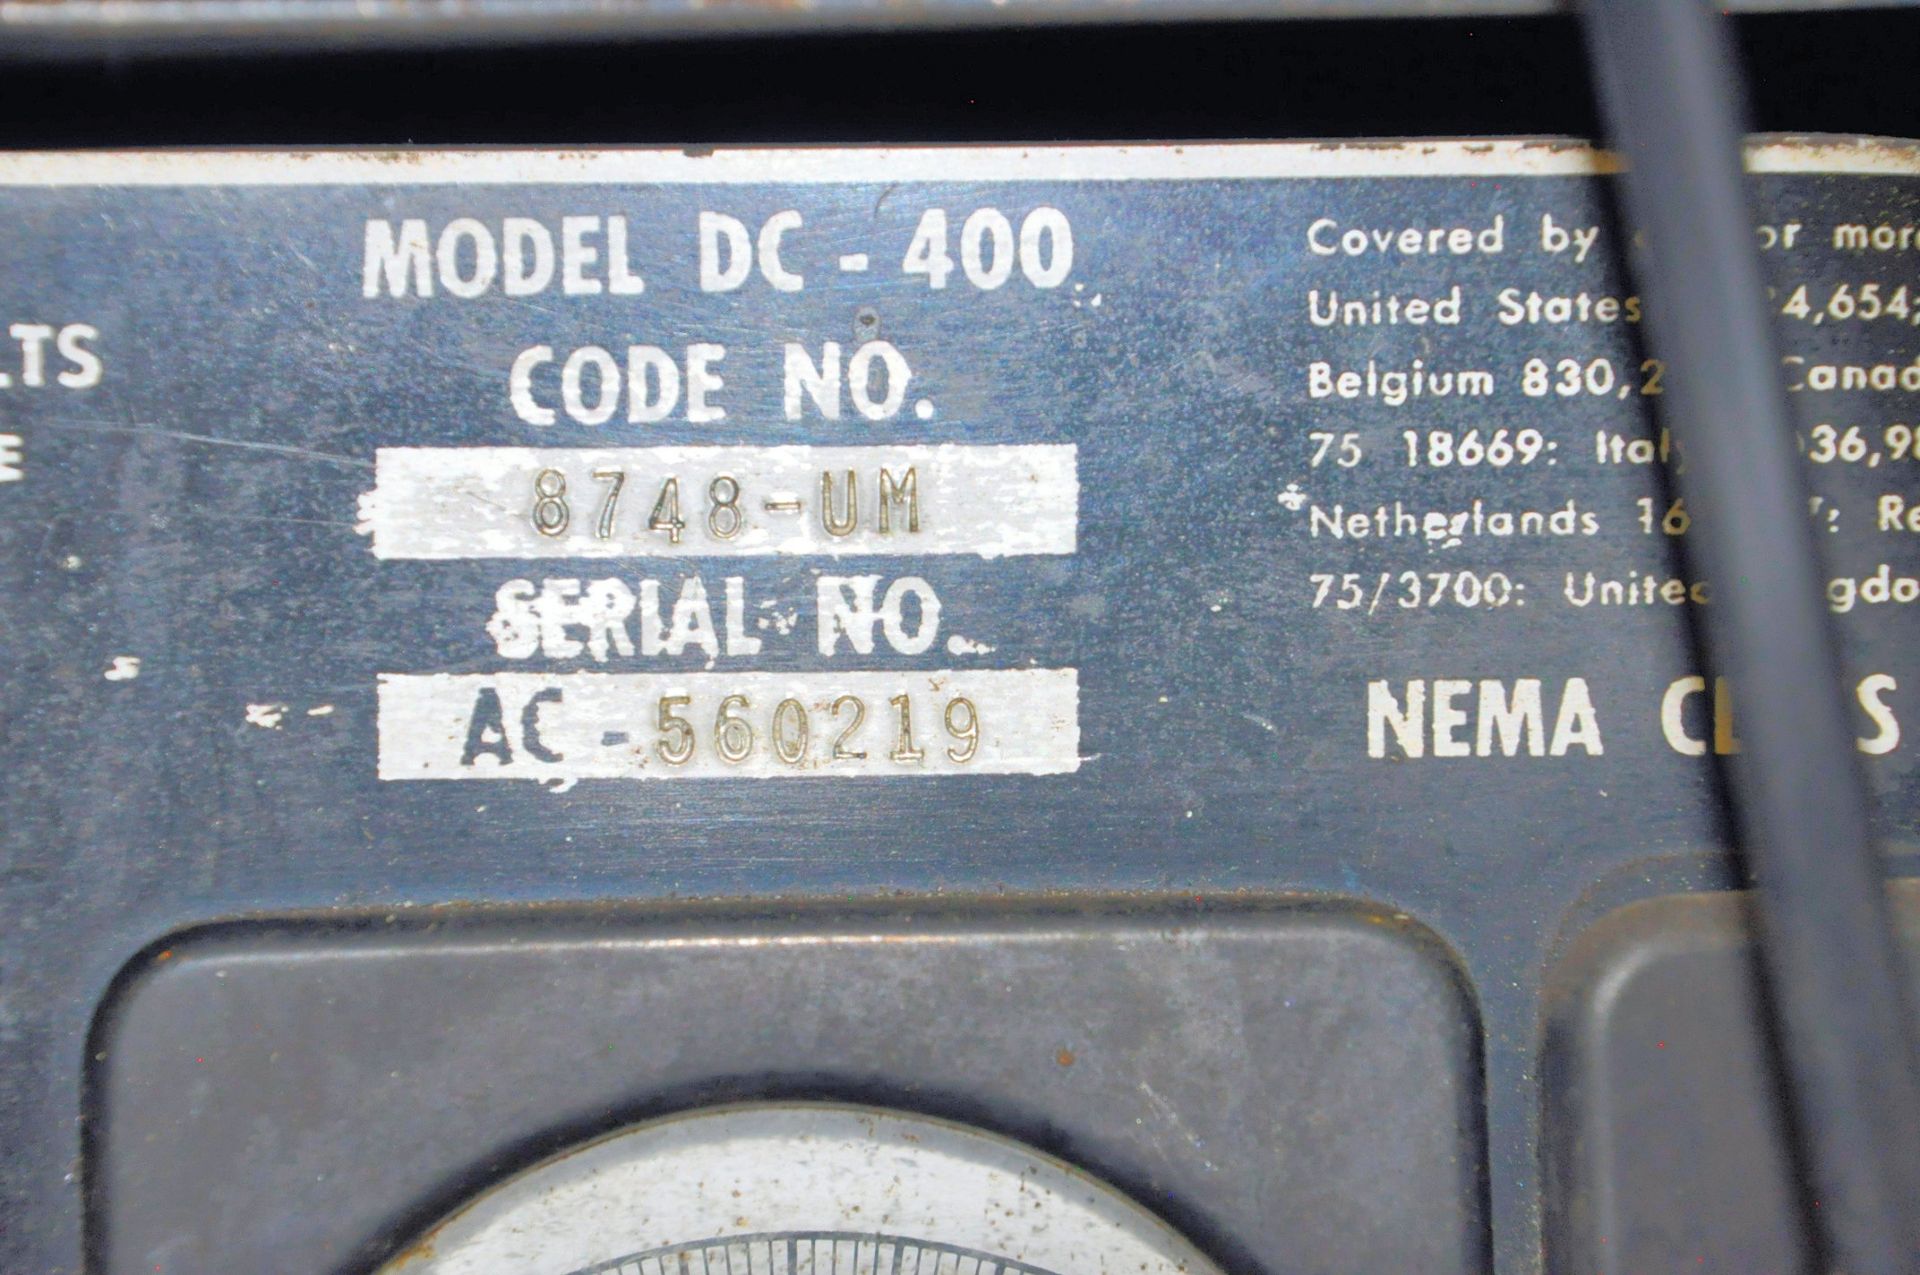 Lincoln Idealarc DC-400, 400-Amps Capacity CV-DC Mig Welding Power Source, S/n AC-560219, with - Image 5 of 5